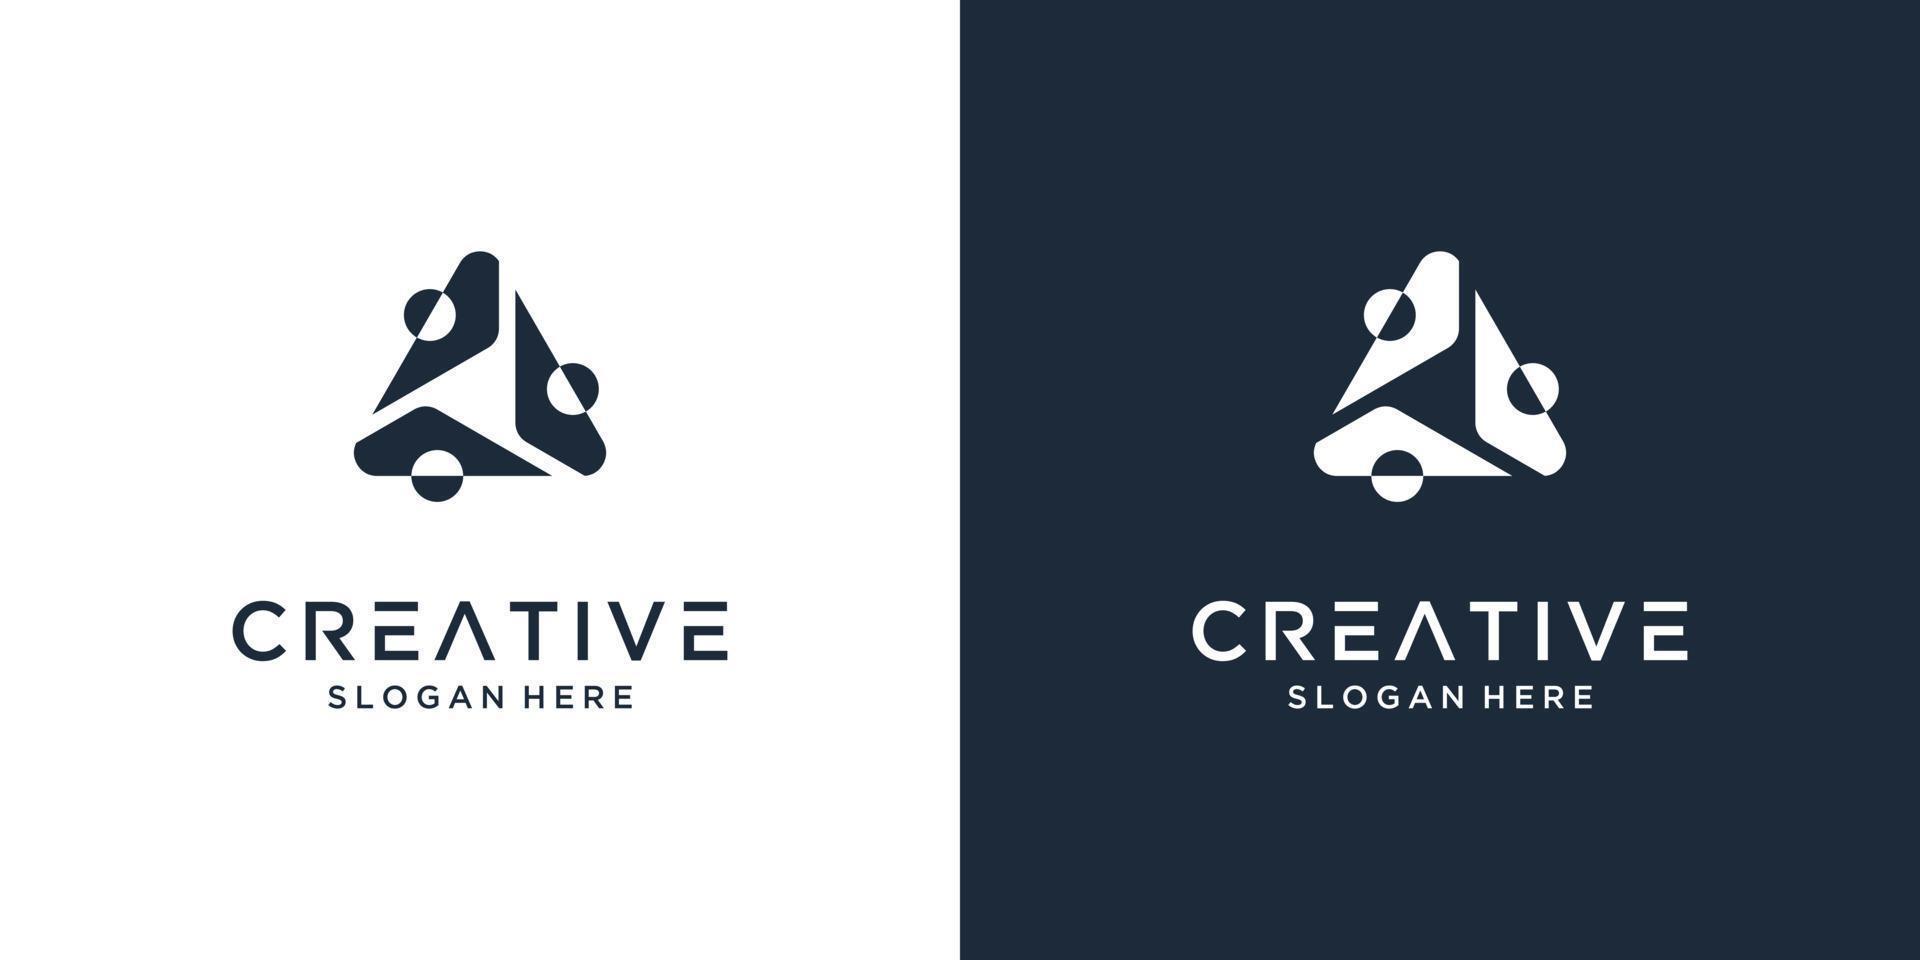 Creative letter A logo design with group symbol vector